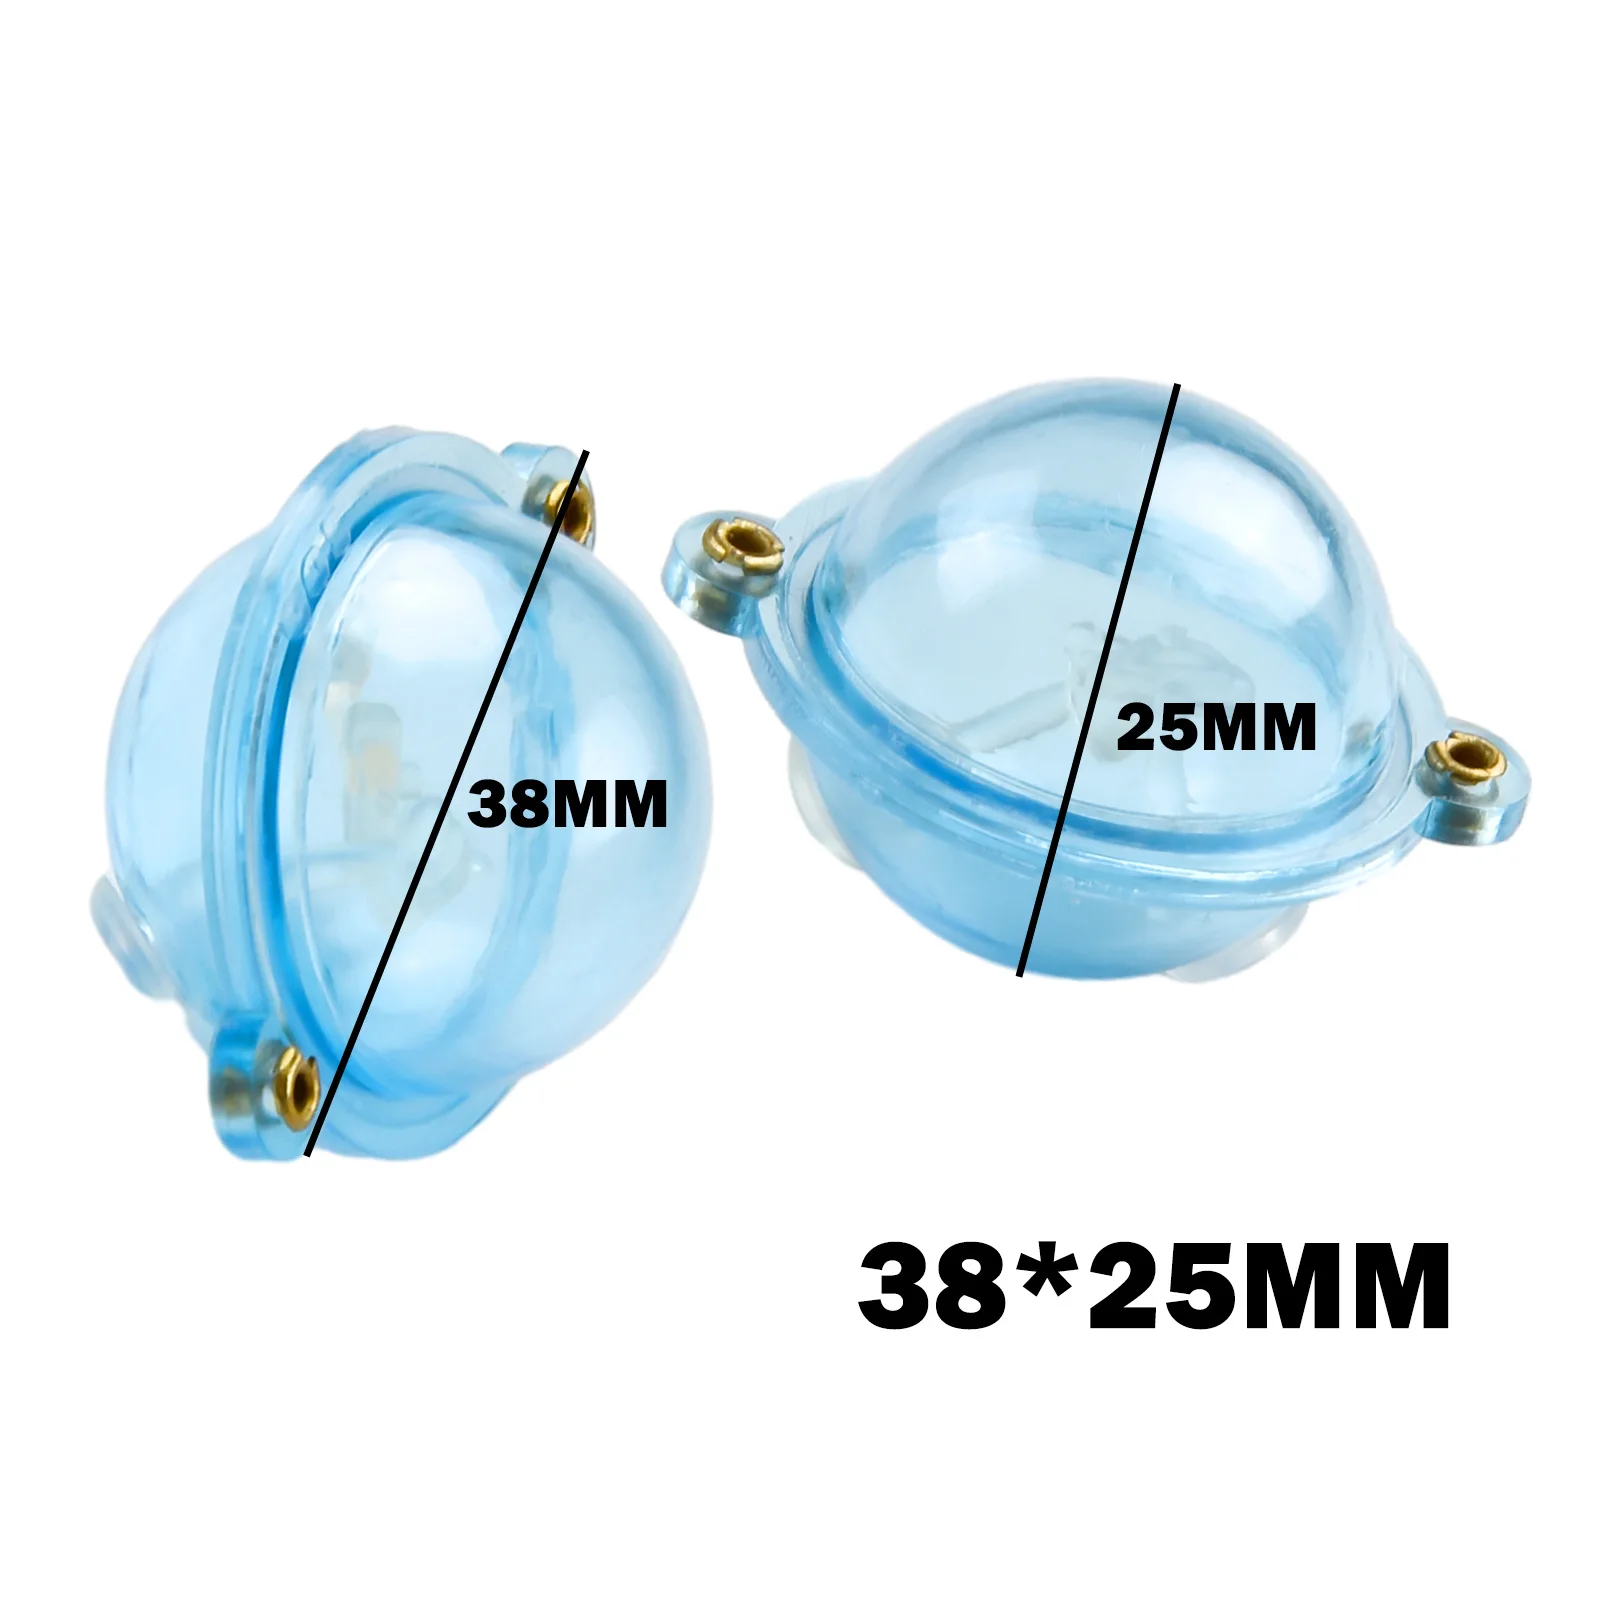 Water Injection Float Round Bubble Floats Round Bubble Floats 25mm 38*25mm  Blue Boat Fishing Float Accessories